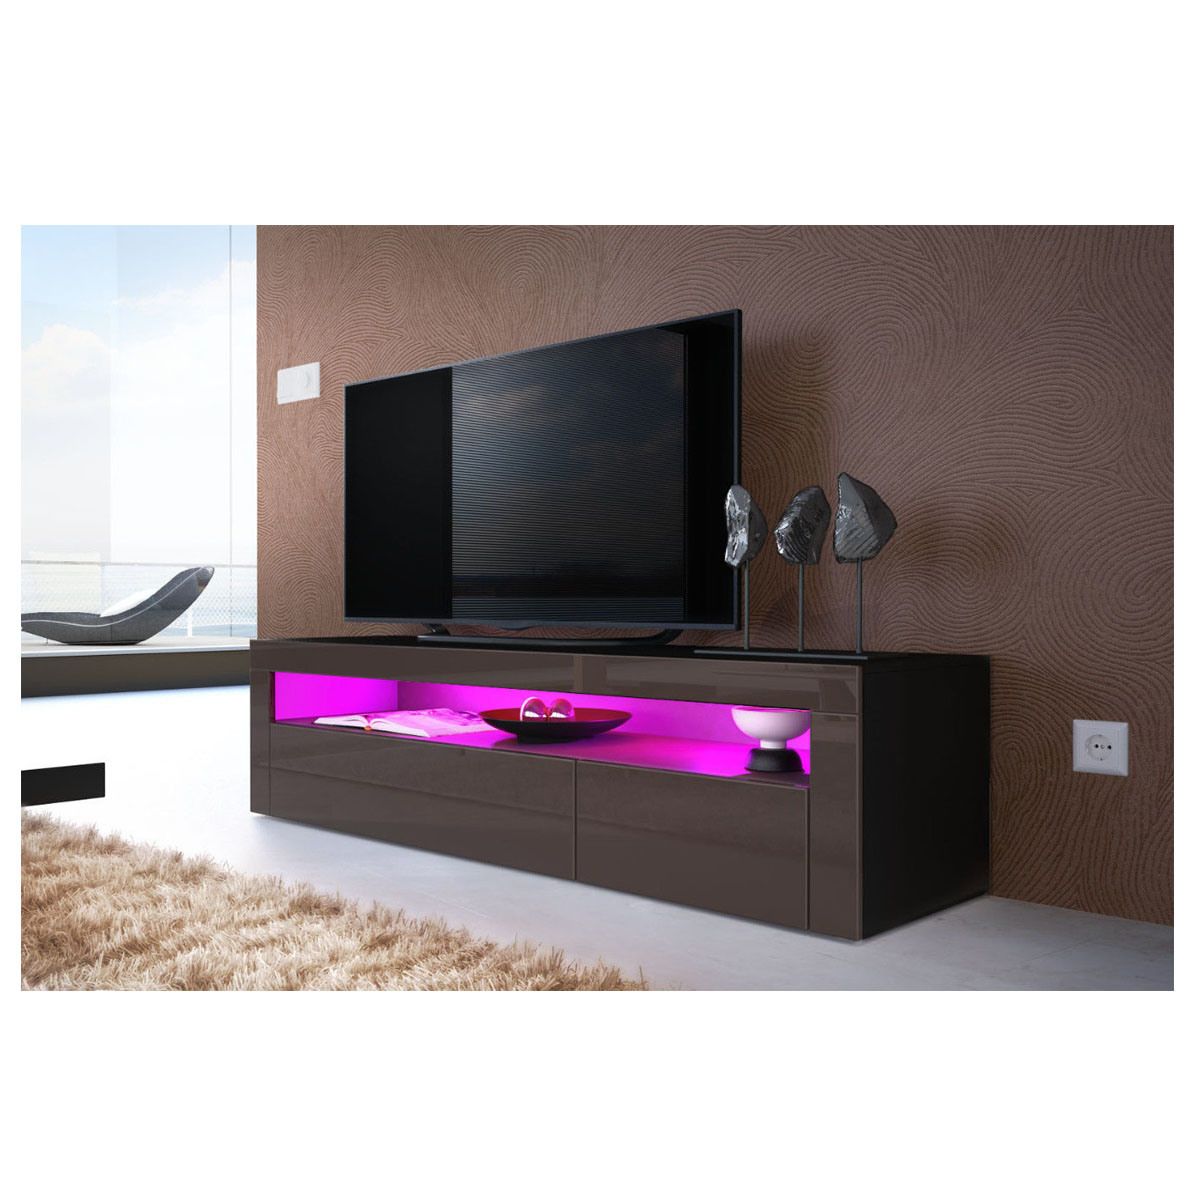 China High Gloss Uv Black Led Light Sideboard Tv Unit With Dillon Black Tv Unit Stands (View 4 of 15)